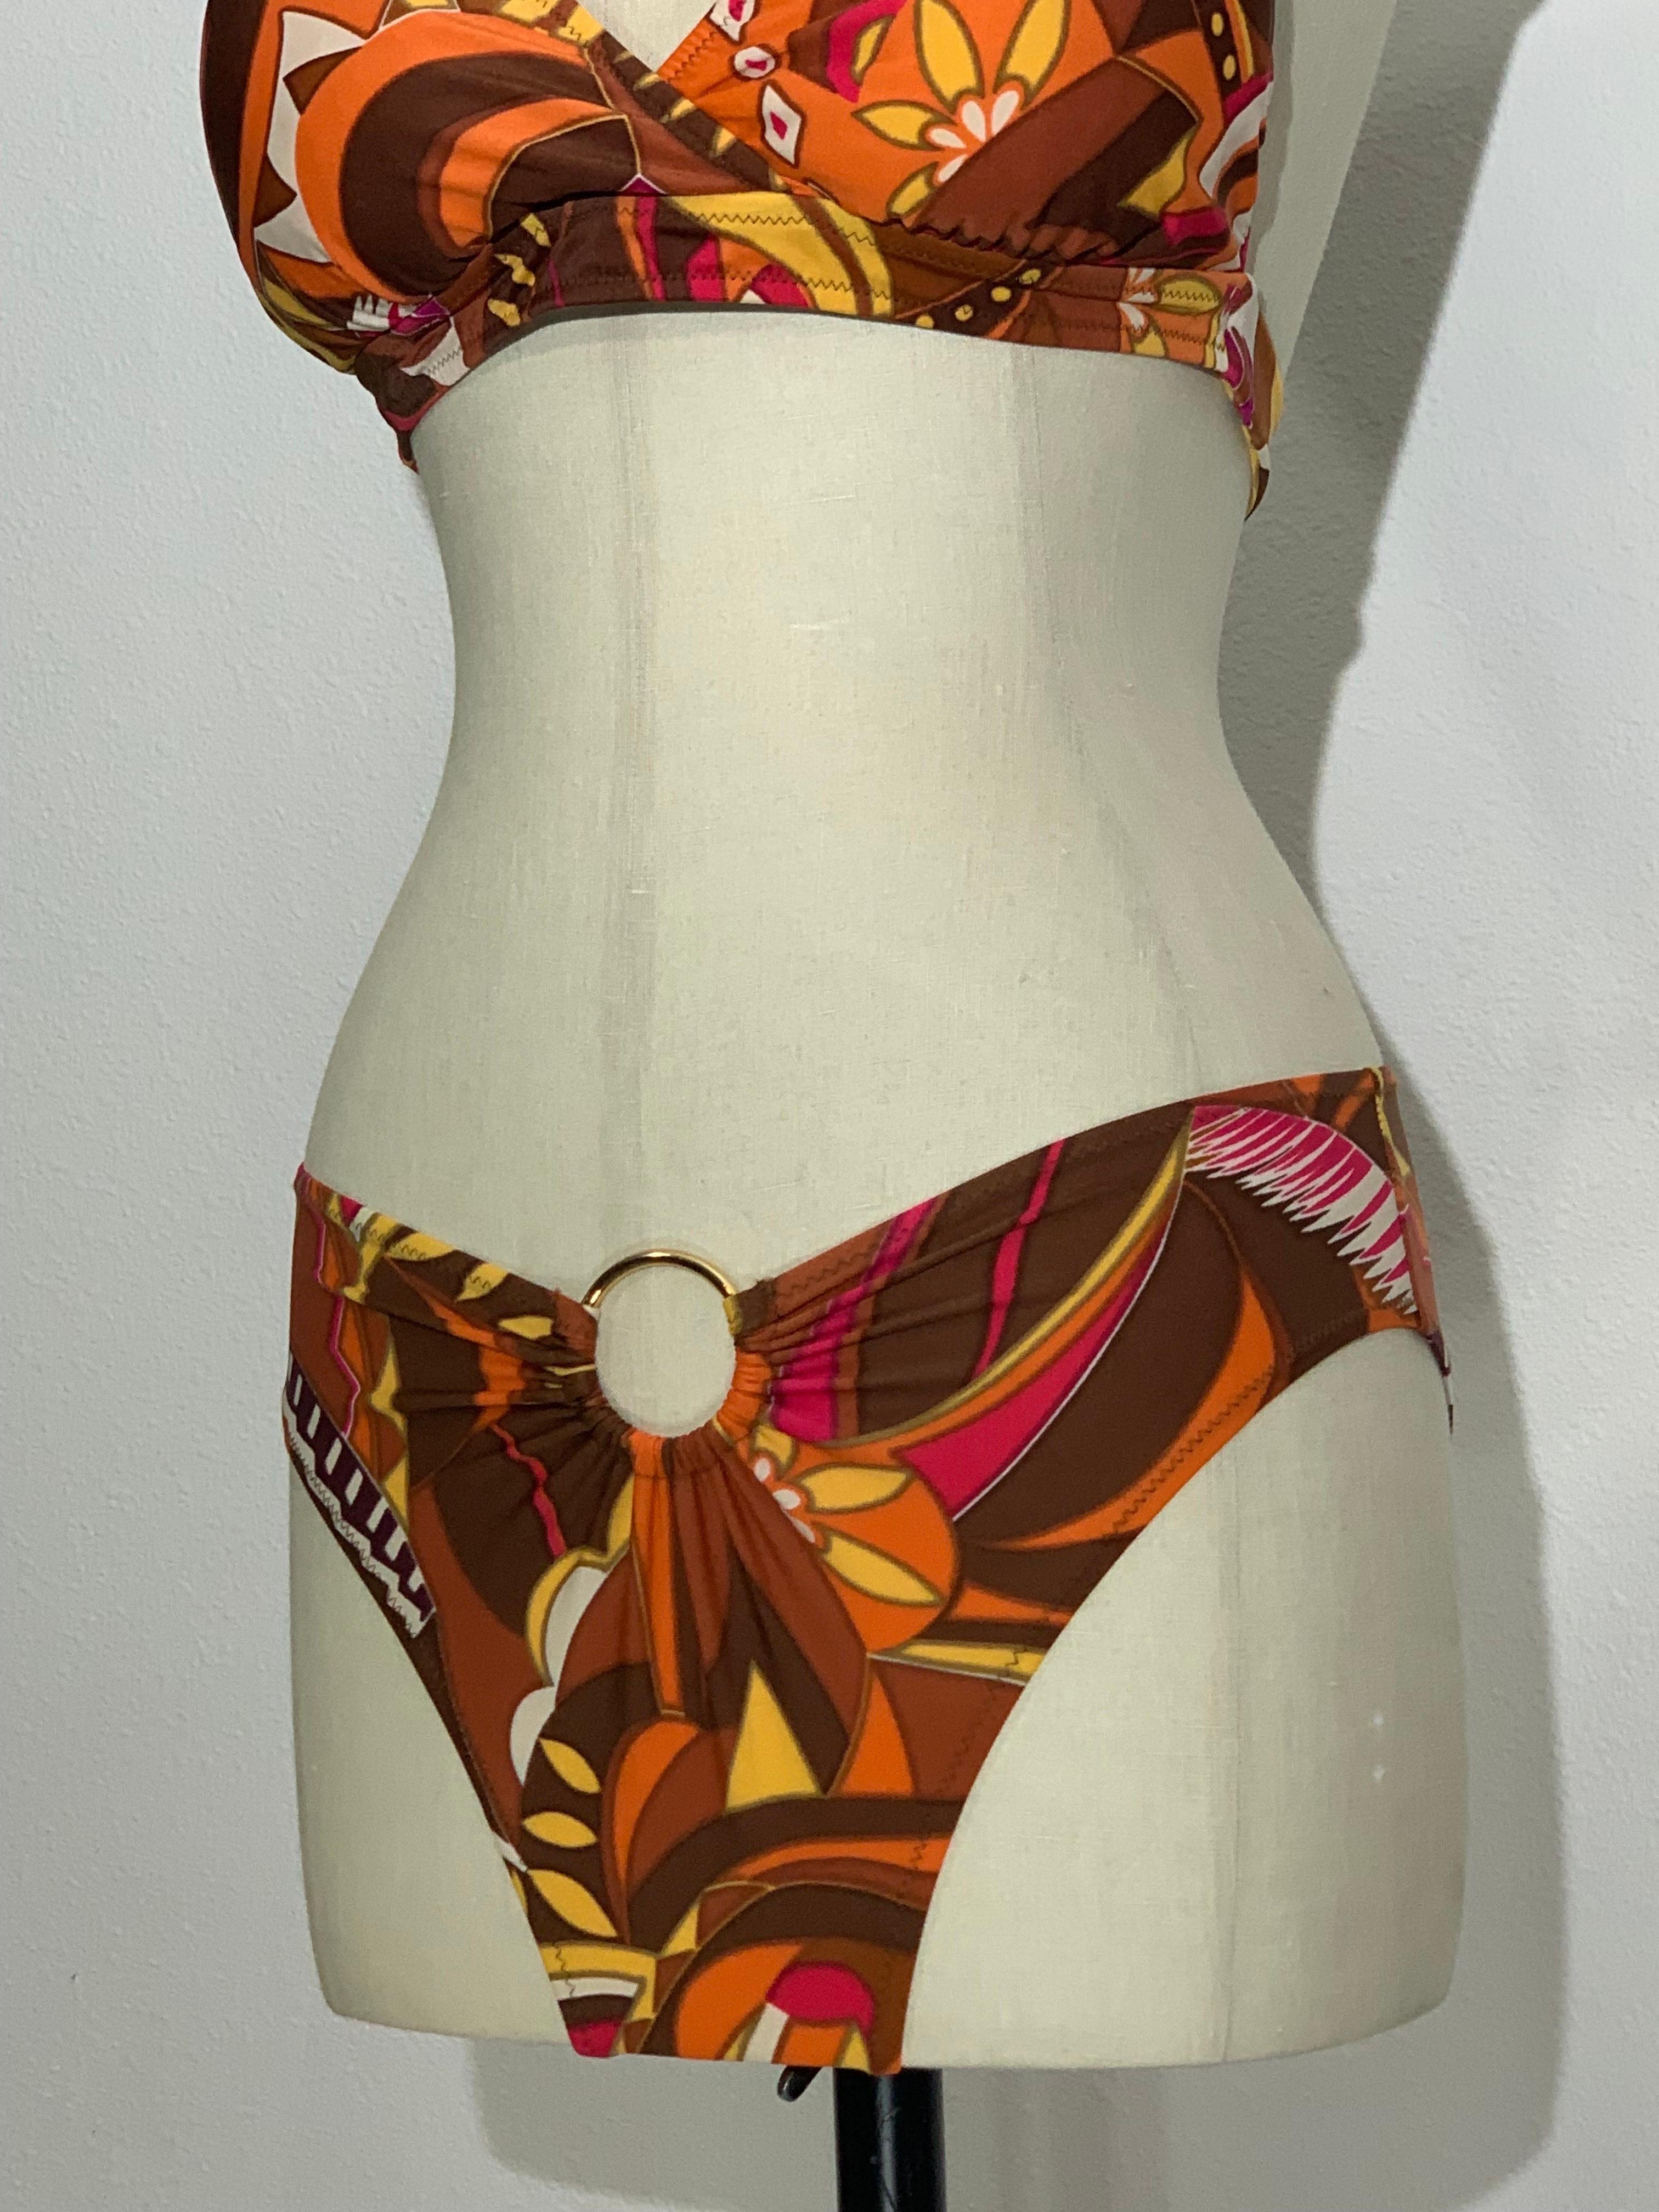 Women's 1970s Gottex Stylized Floral 2-Piece Bikini Swimsuit in Brown Copper and Orange For Sale